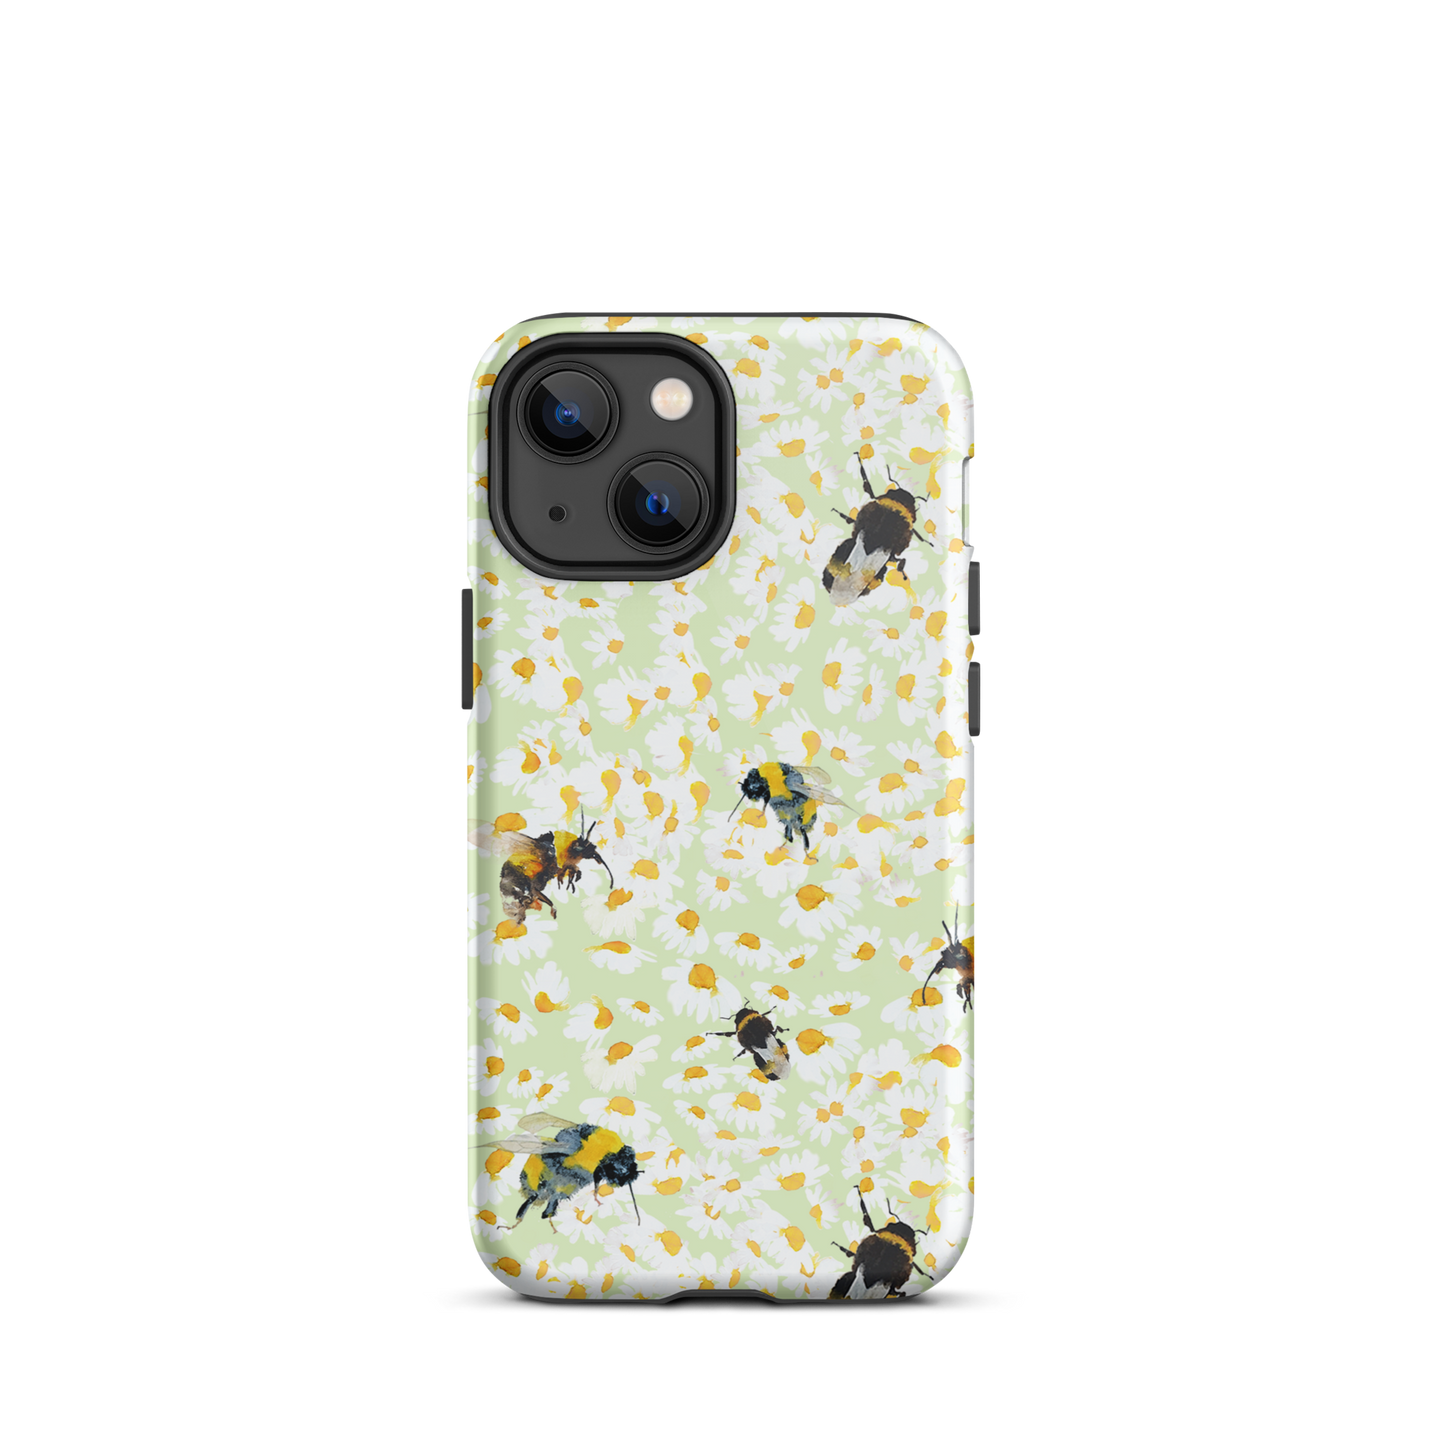 Bumblebee and Daisies Mobile Phone Case